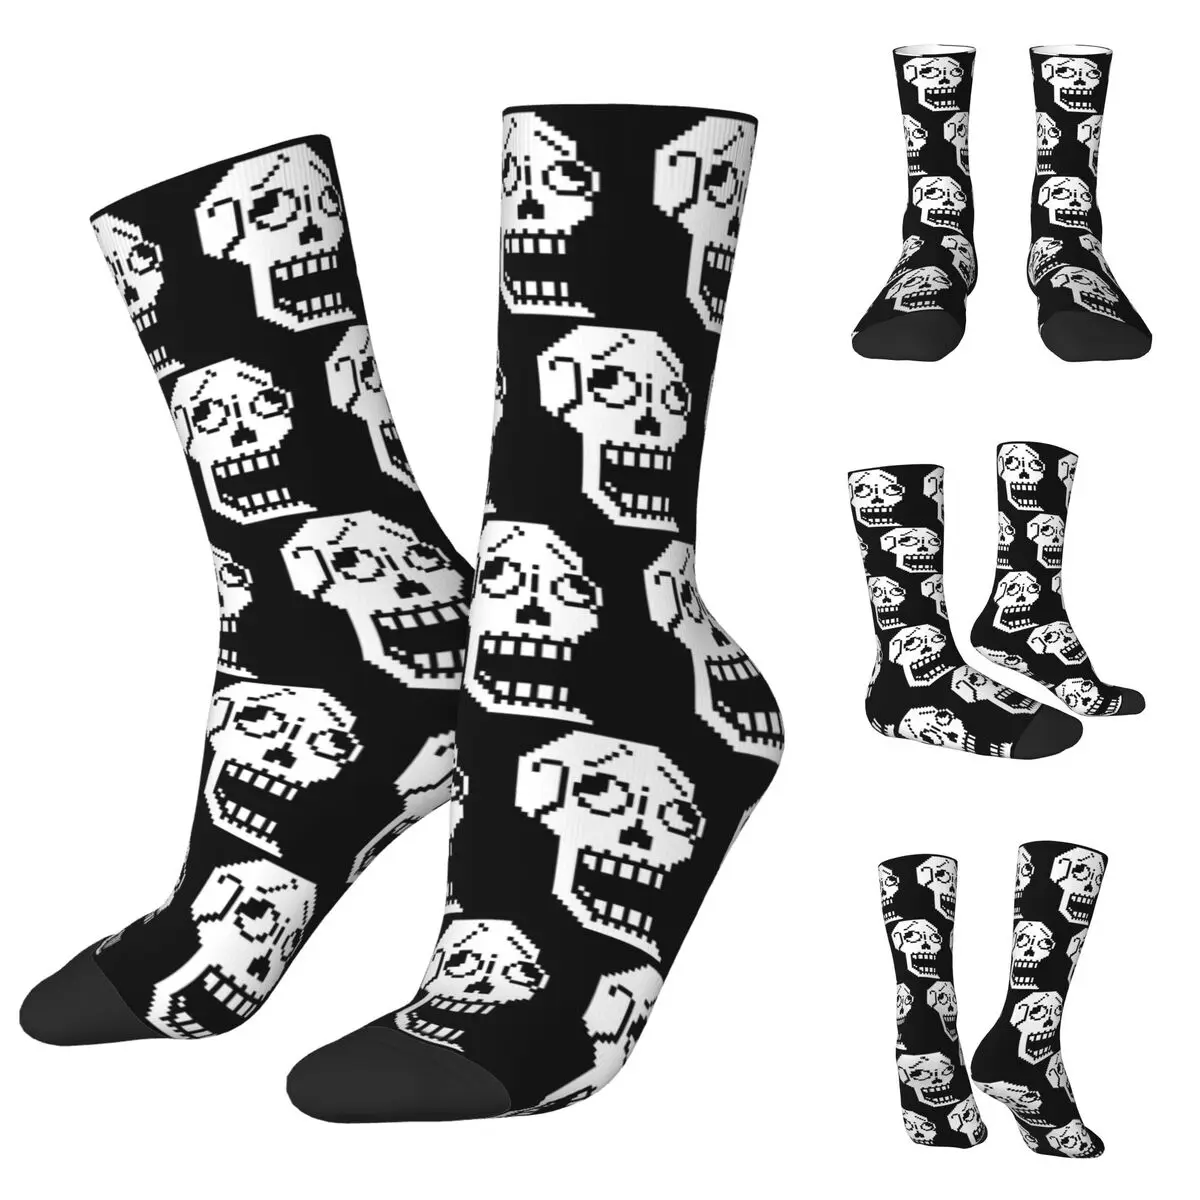 Sans And Papyrus Sprites Undertale Napstablook Men and Women printing Socks,Windproof Applicable throughout the year sans and papyrus sprites undertale napstablook men women socks windproof printing suitable for all seasons dressing gifts